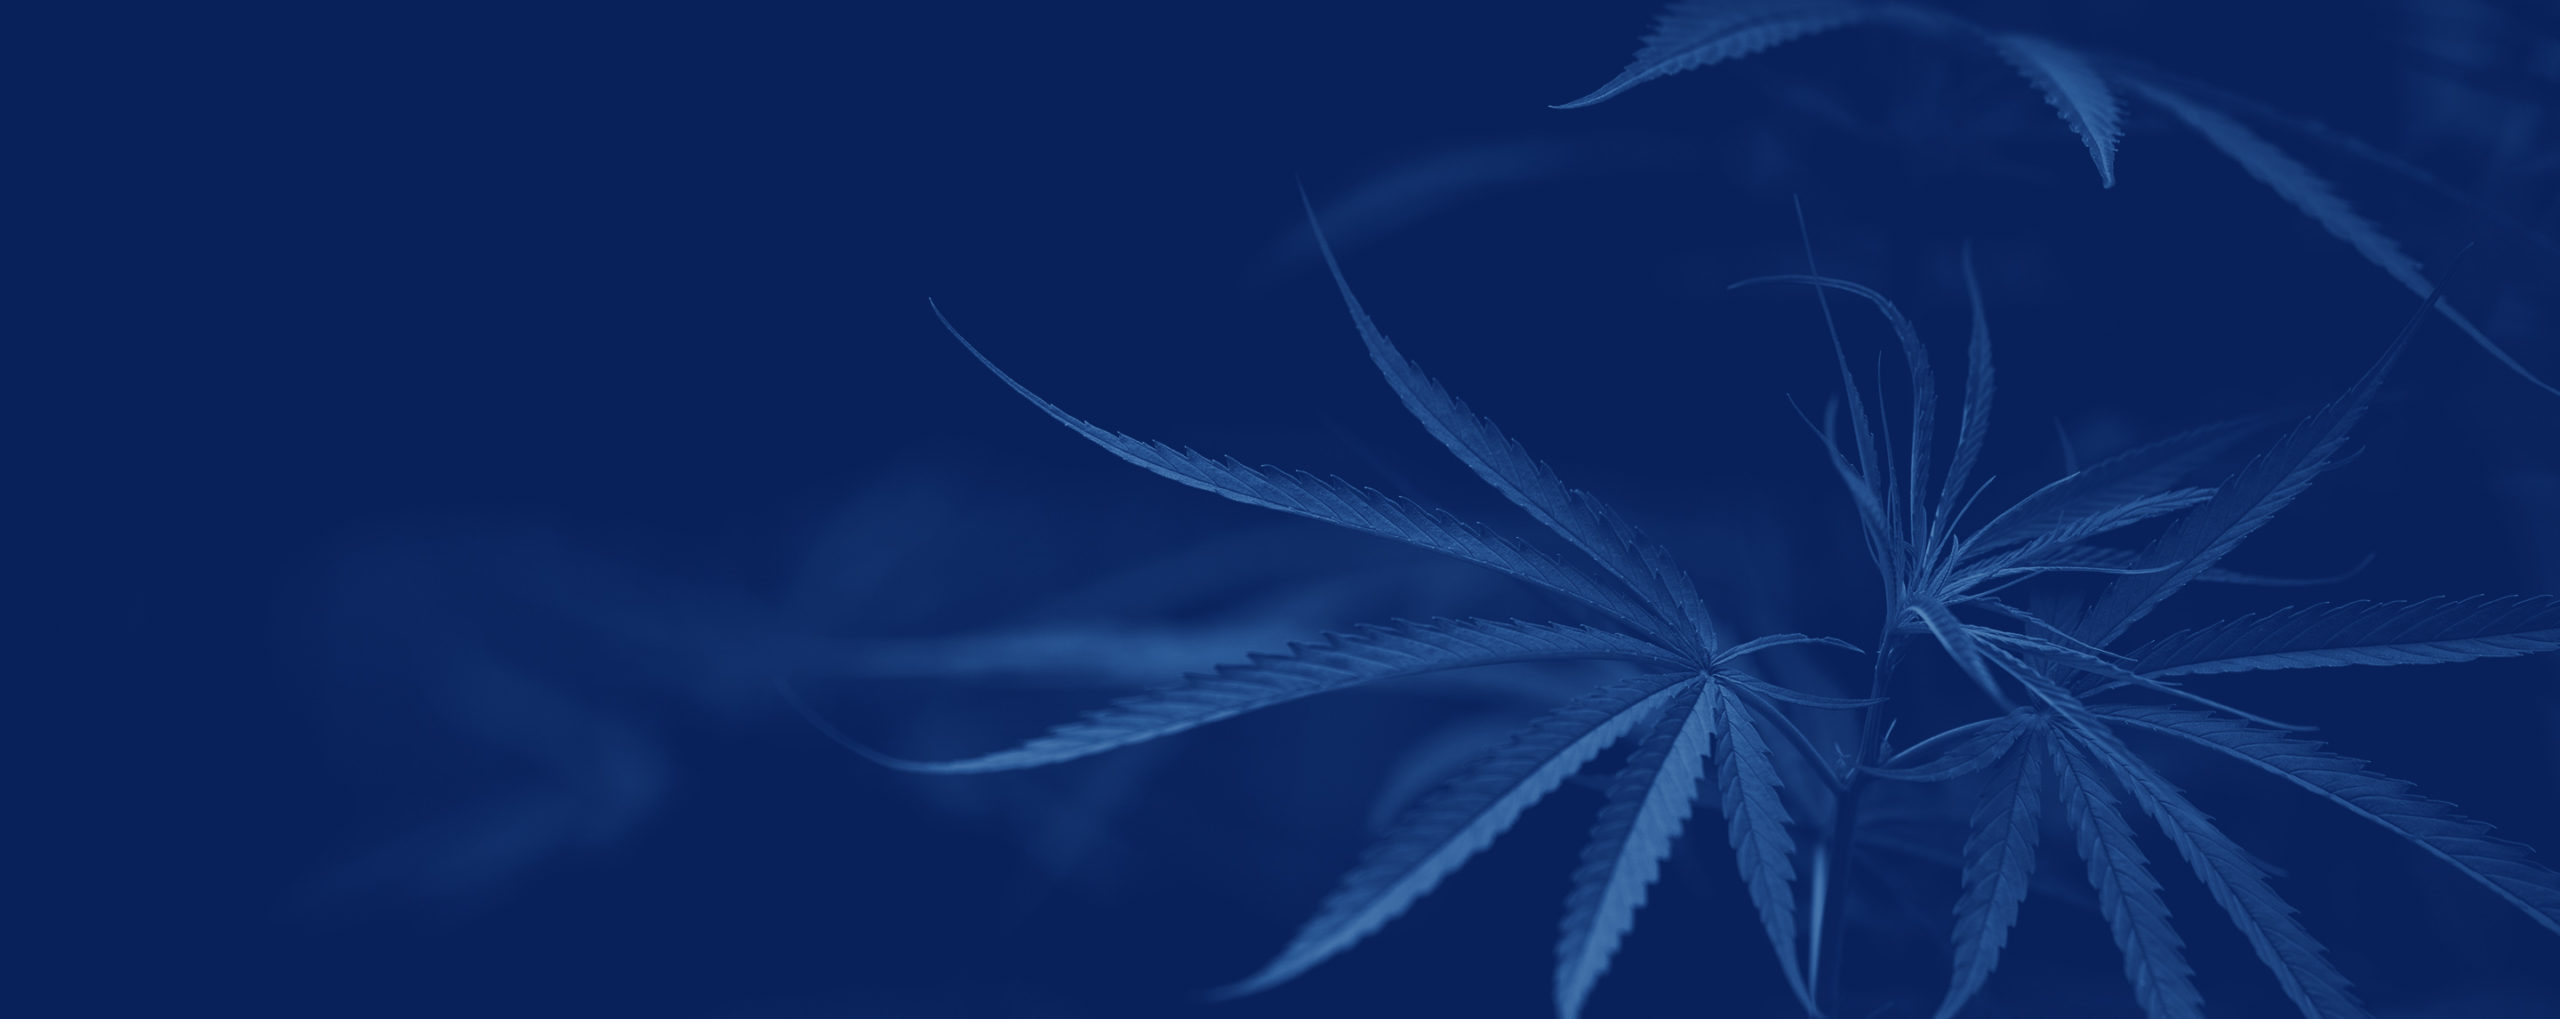 Cannabis Digital Advertising Options: New Opportunities for This Blooming Category